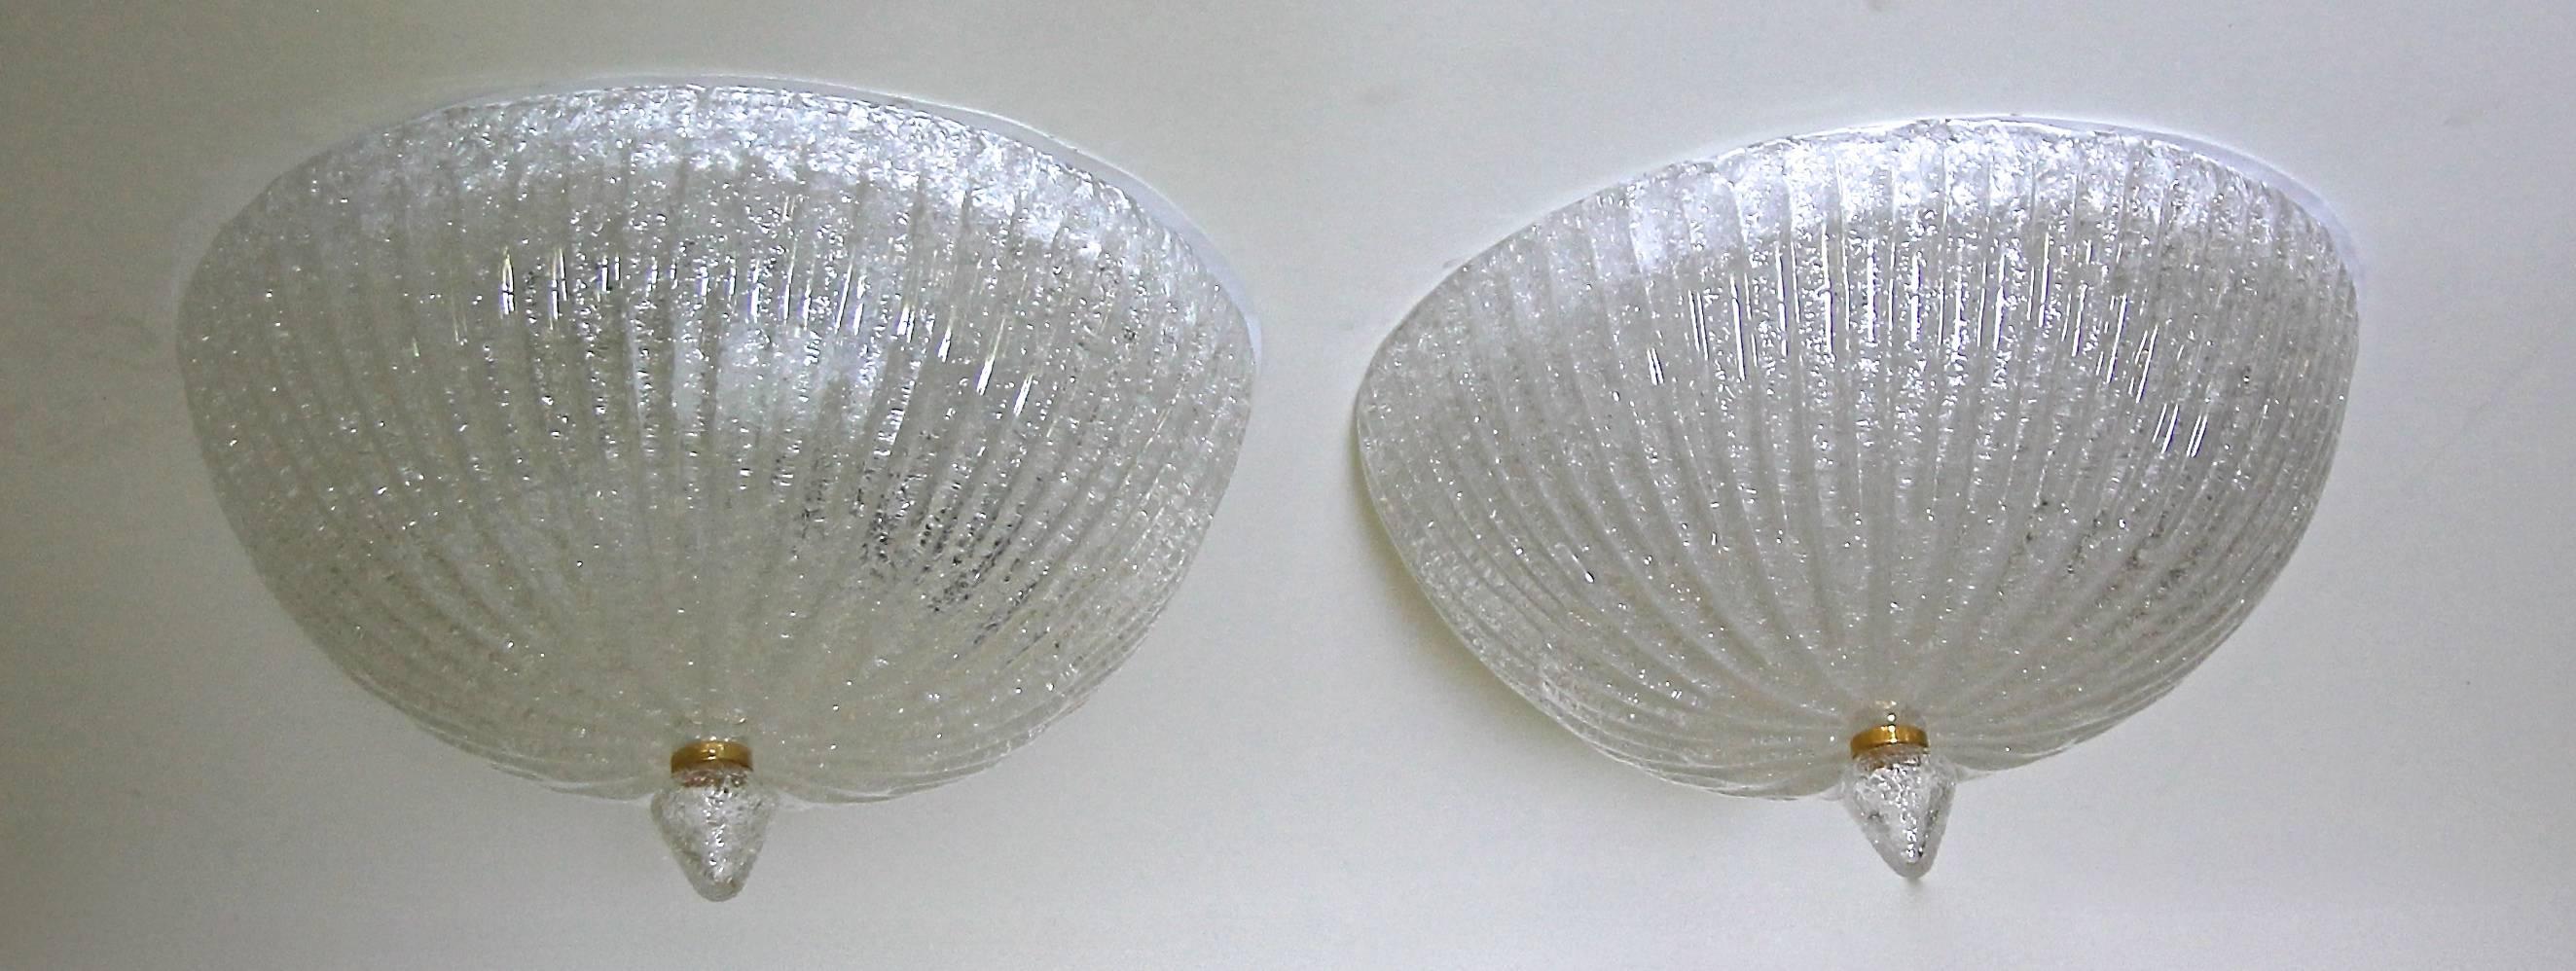 Pair of Murano Rugiadoso Clear Glass Flush Mount Ceiling Lights For Sale 3